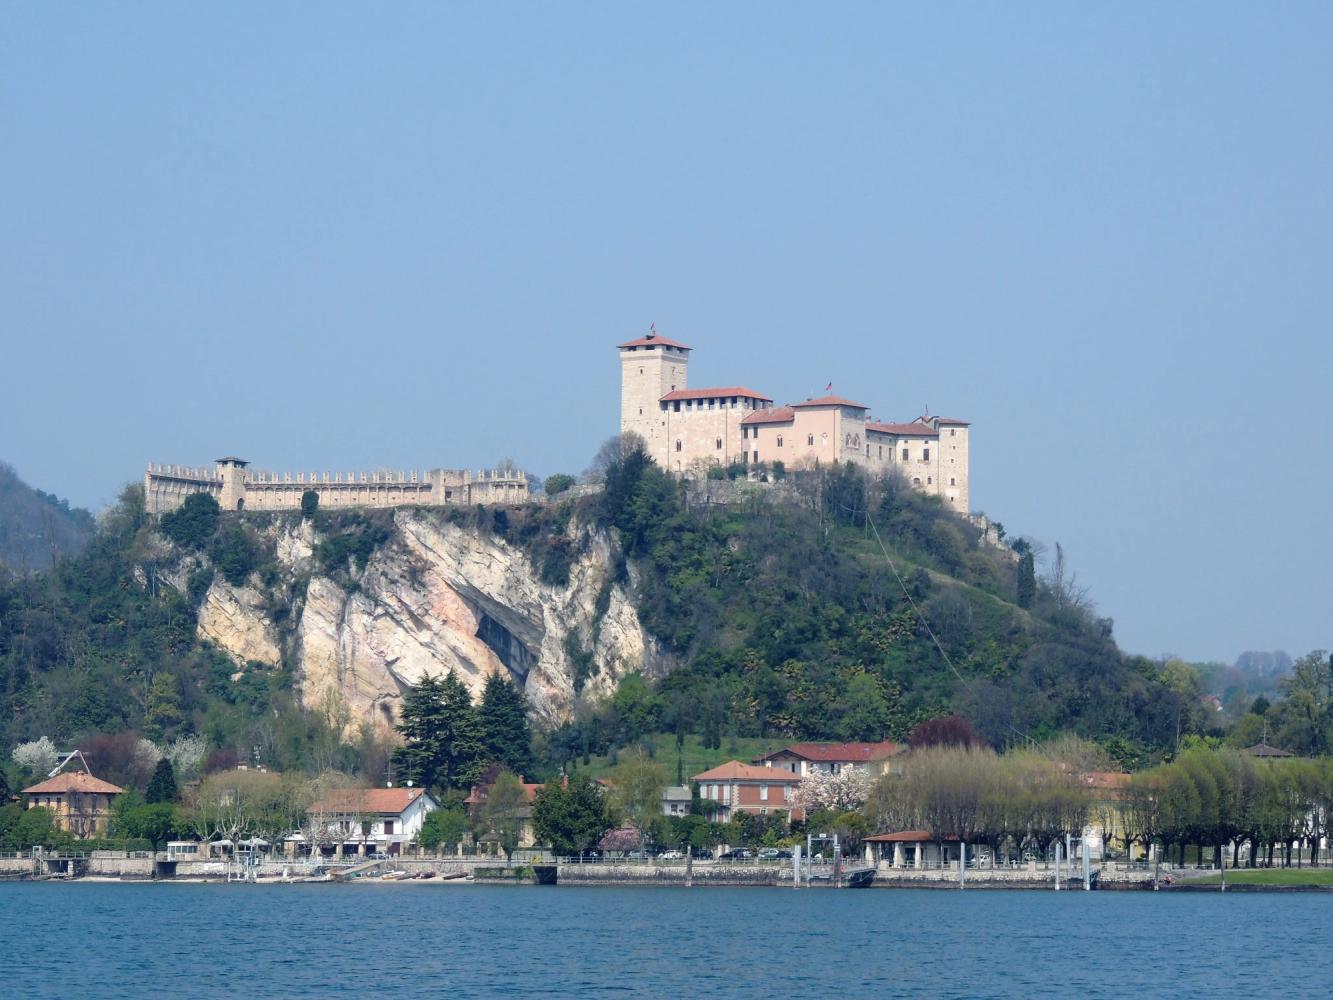 Spectacular View of the Fortress of Angera from Lake Maggiore